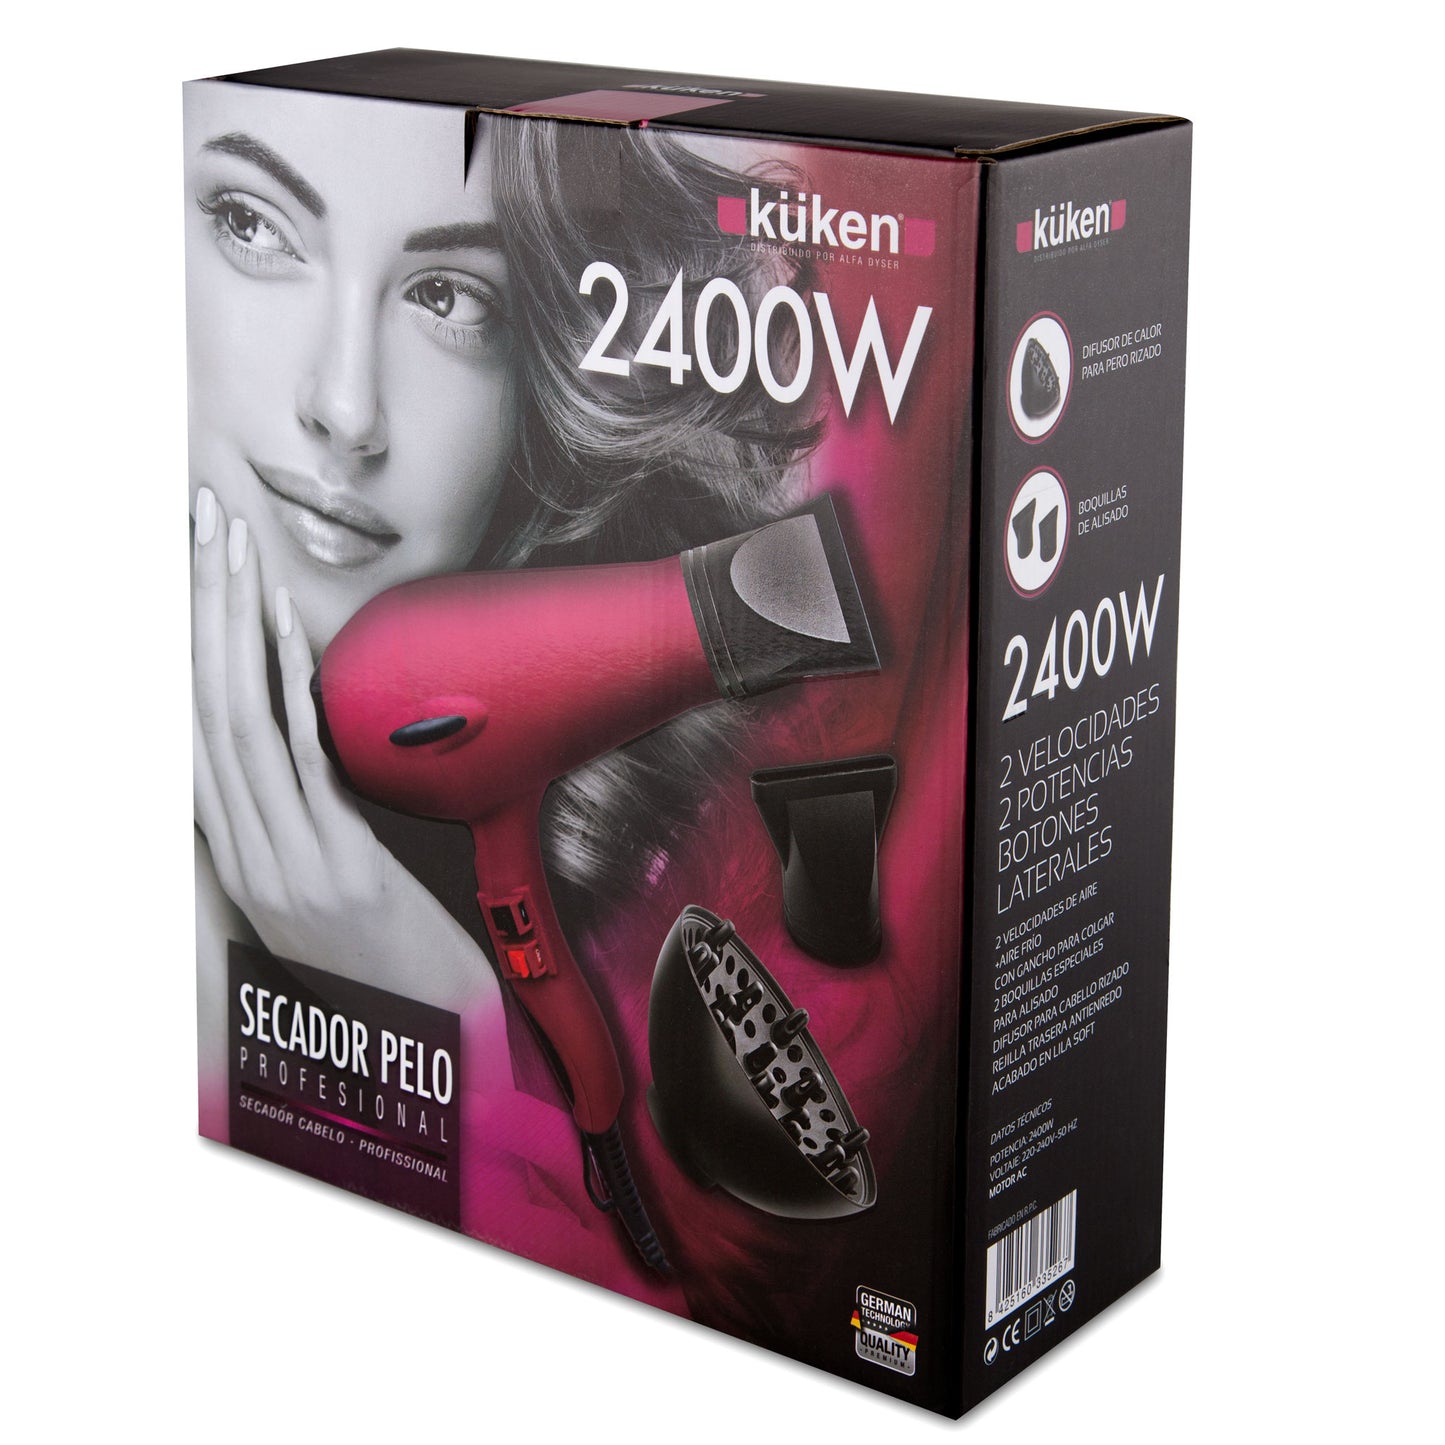 PROFESSIONAL HAIR DRYER IONIC LILAS 2400W 